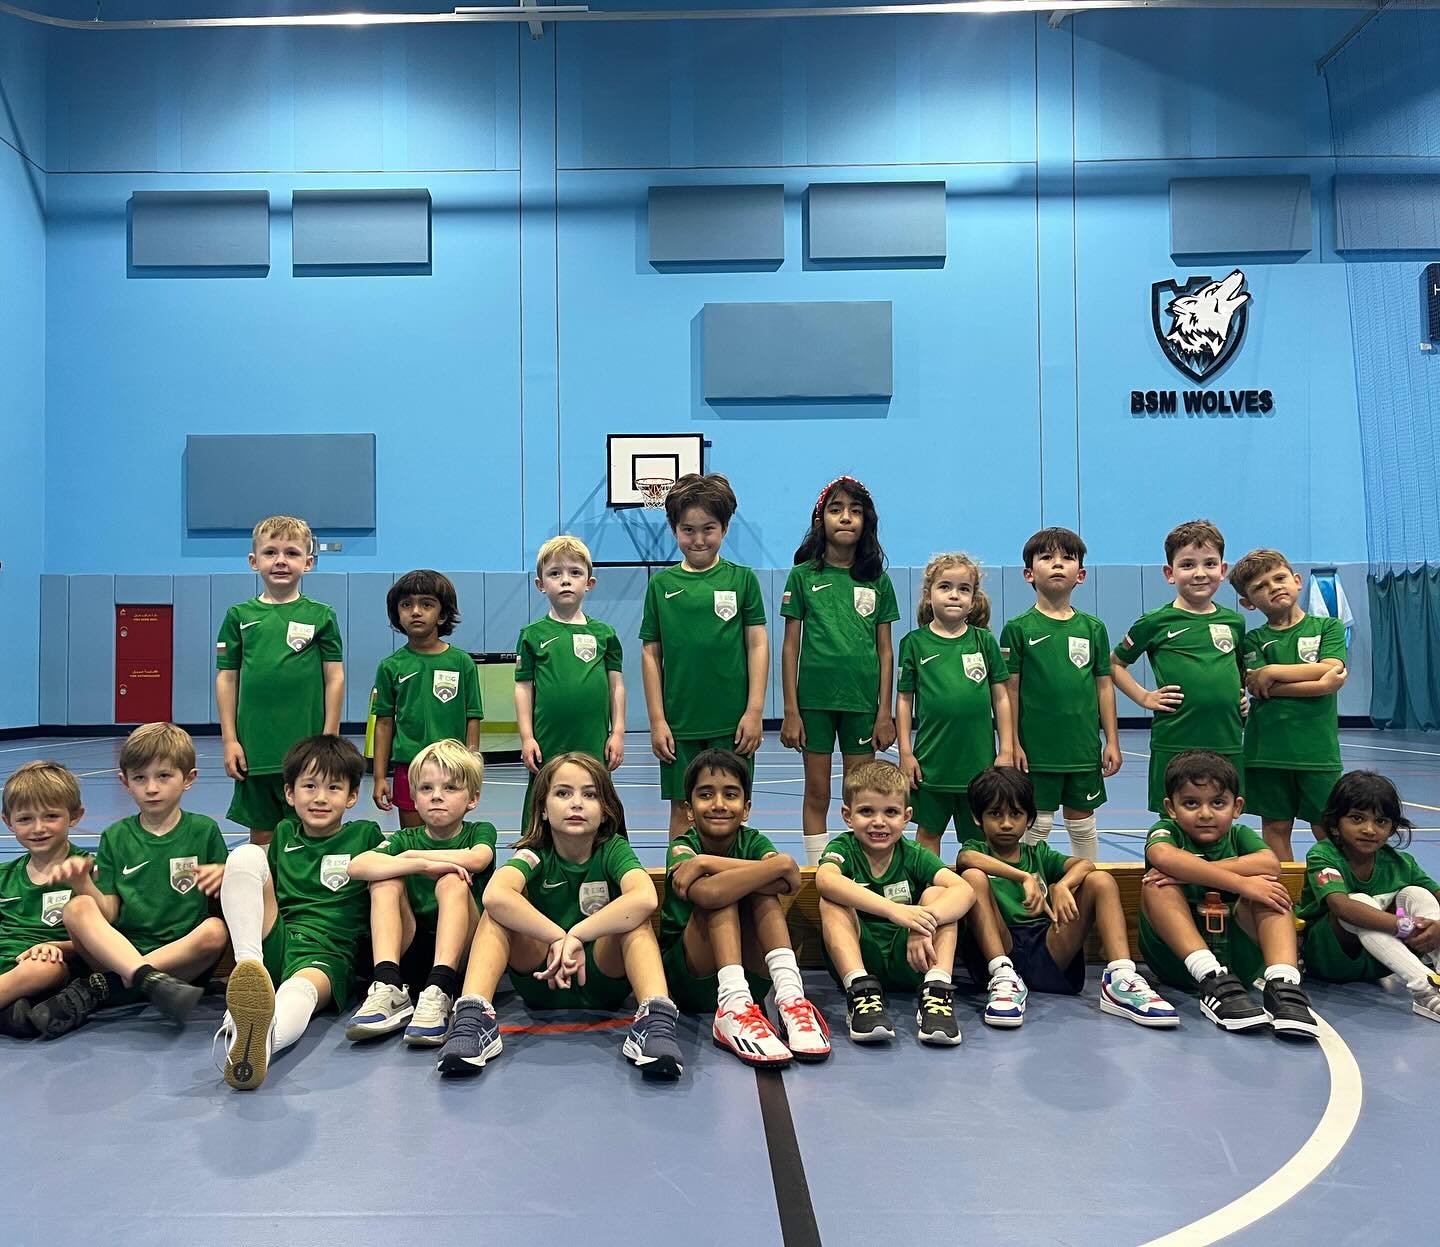 ESG Football Academy Term 4 in full flow.
Our energetic U6 group who are very happy to escape the rising temperatures.🥵🌞🇴🇲⚽️💚
#esgfootballacademy #footballunites #thebeautifulgame #lovefootball #omanfootball #soccer